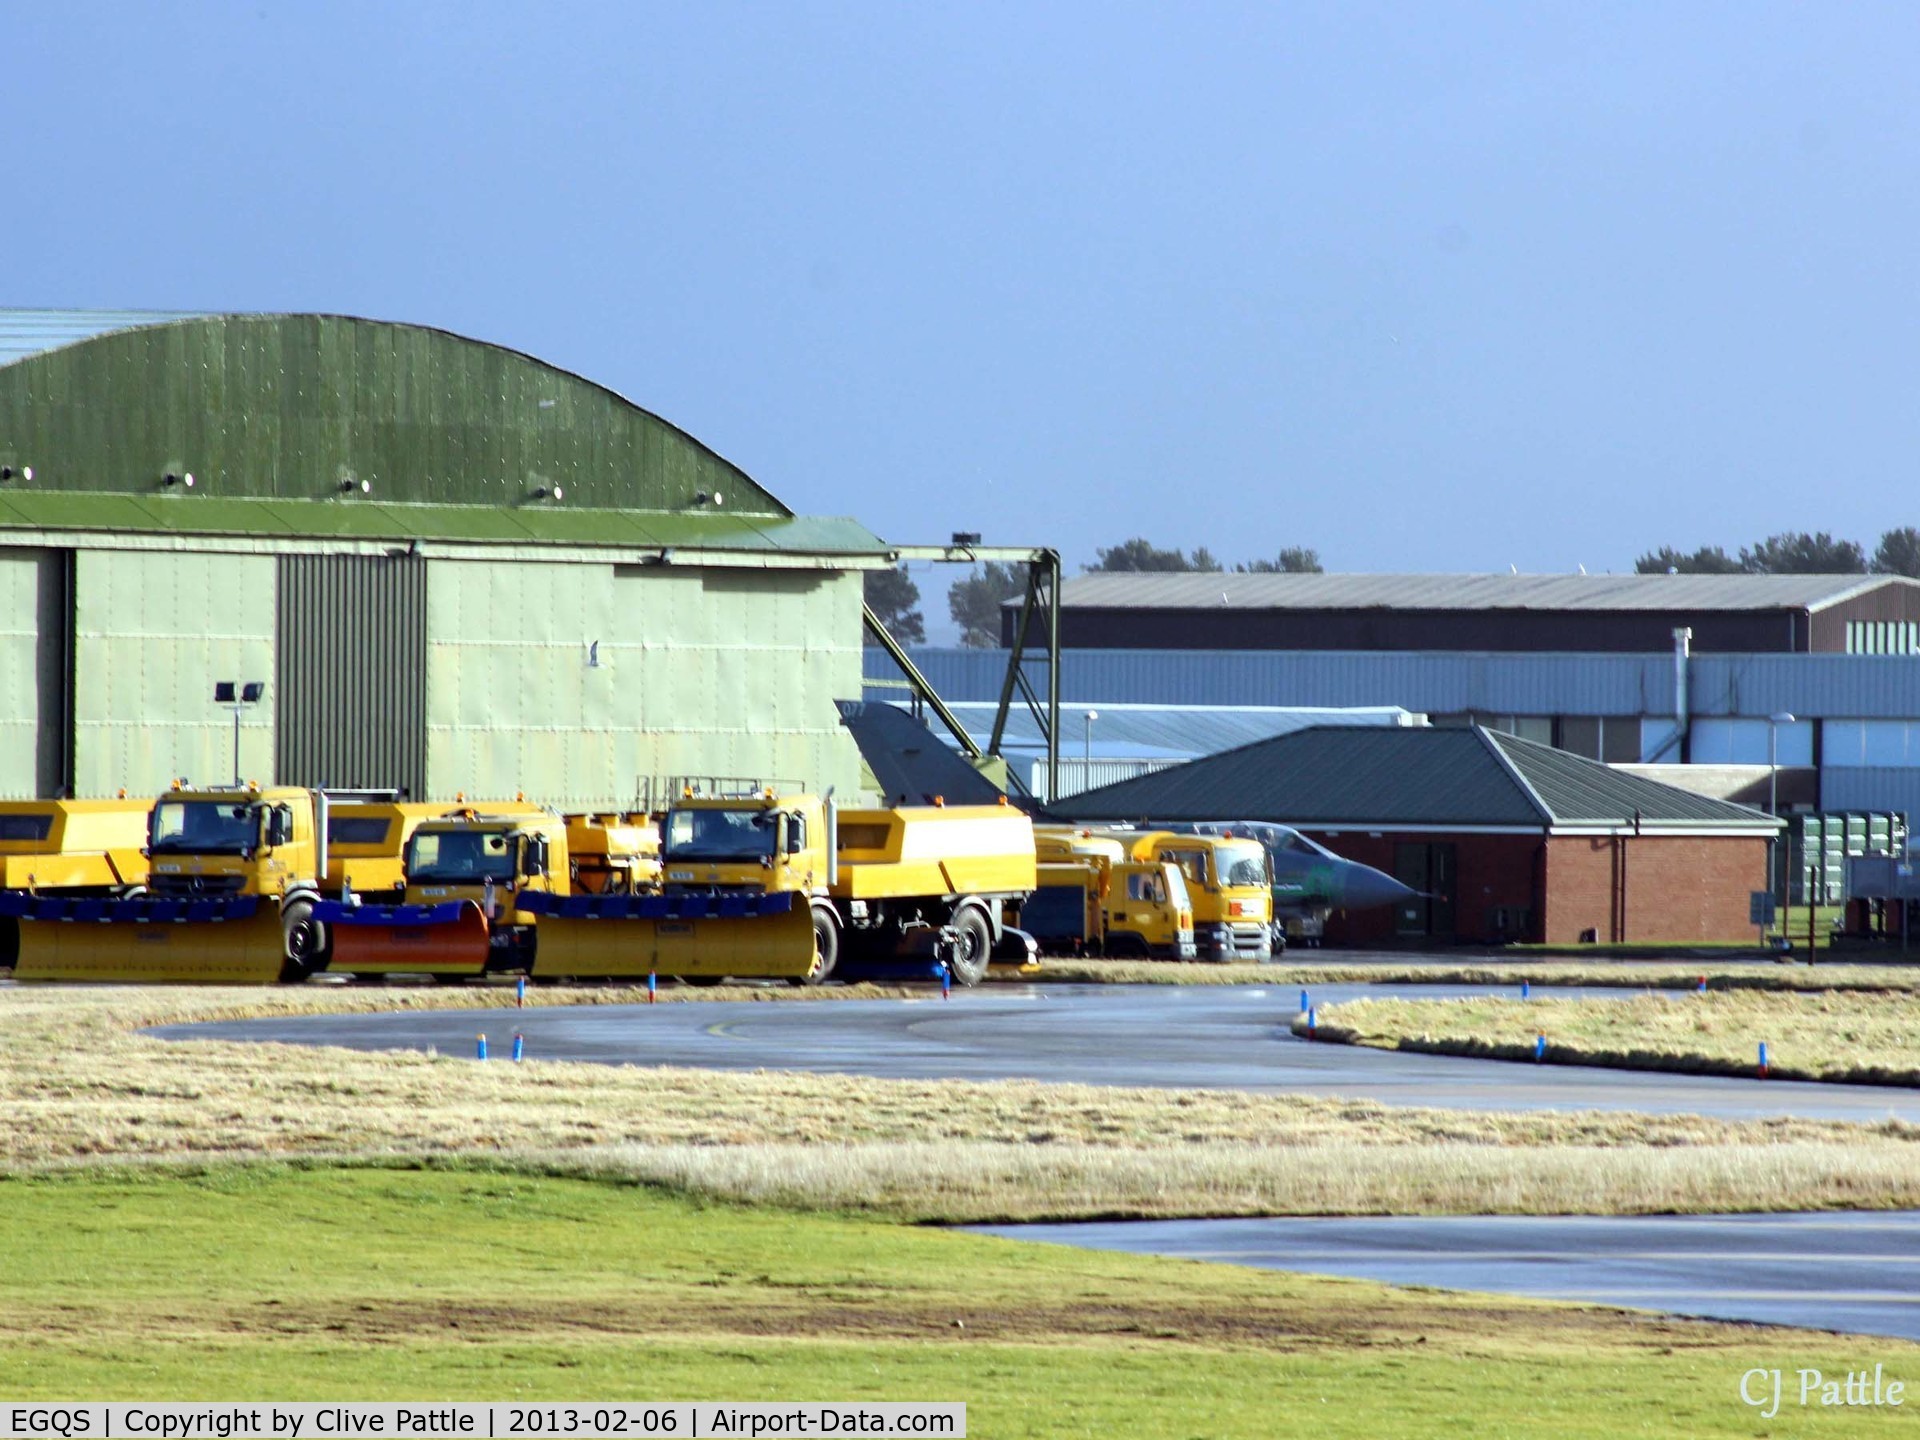 RAF Lossiemouth Airport, Lossiemouth, Scotland United Kingdom (EGQS) - Hangars on east side of airfield close to Rwy 23 threshold - note Tornado GR.4 in amongst stored snow ploughs